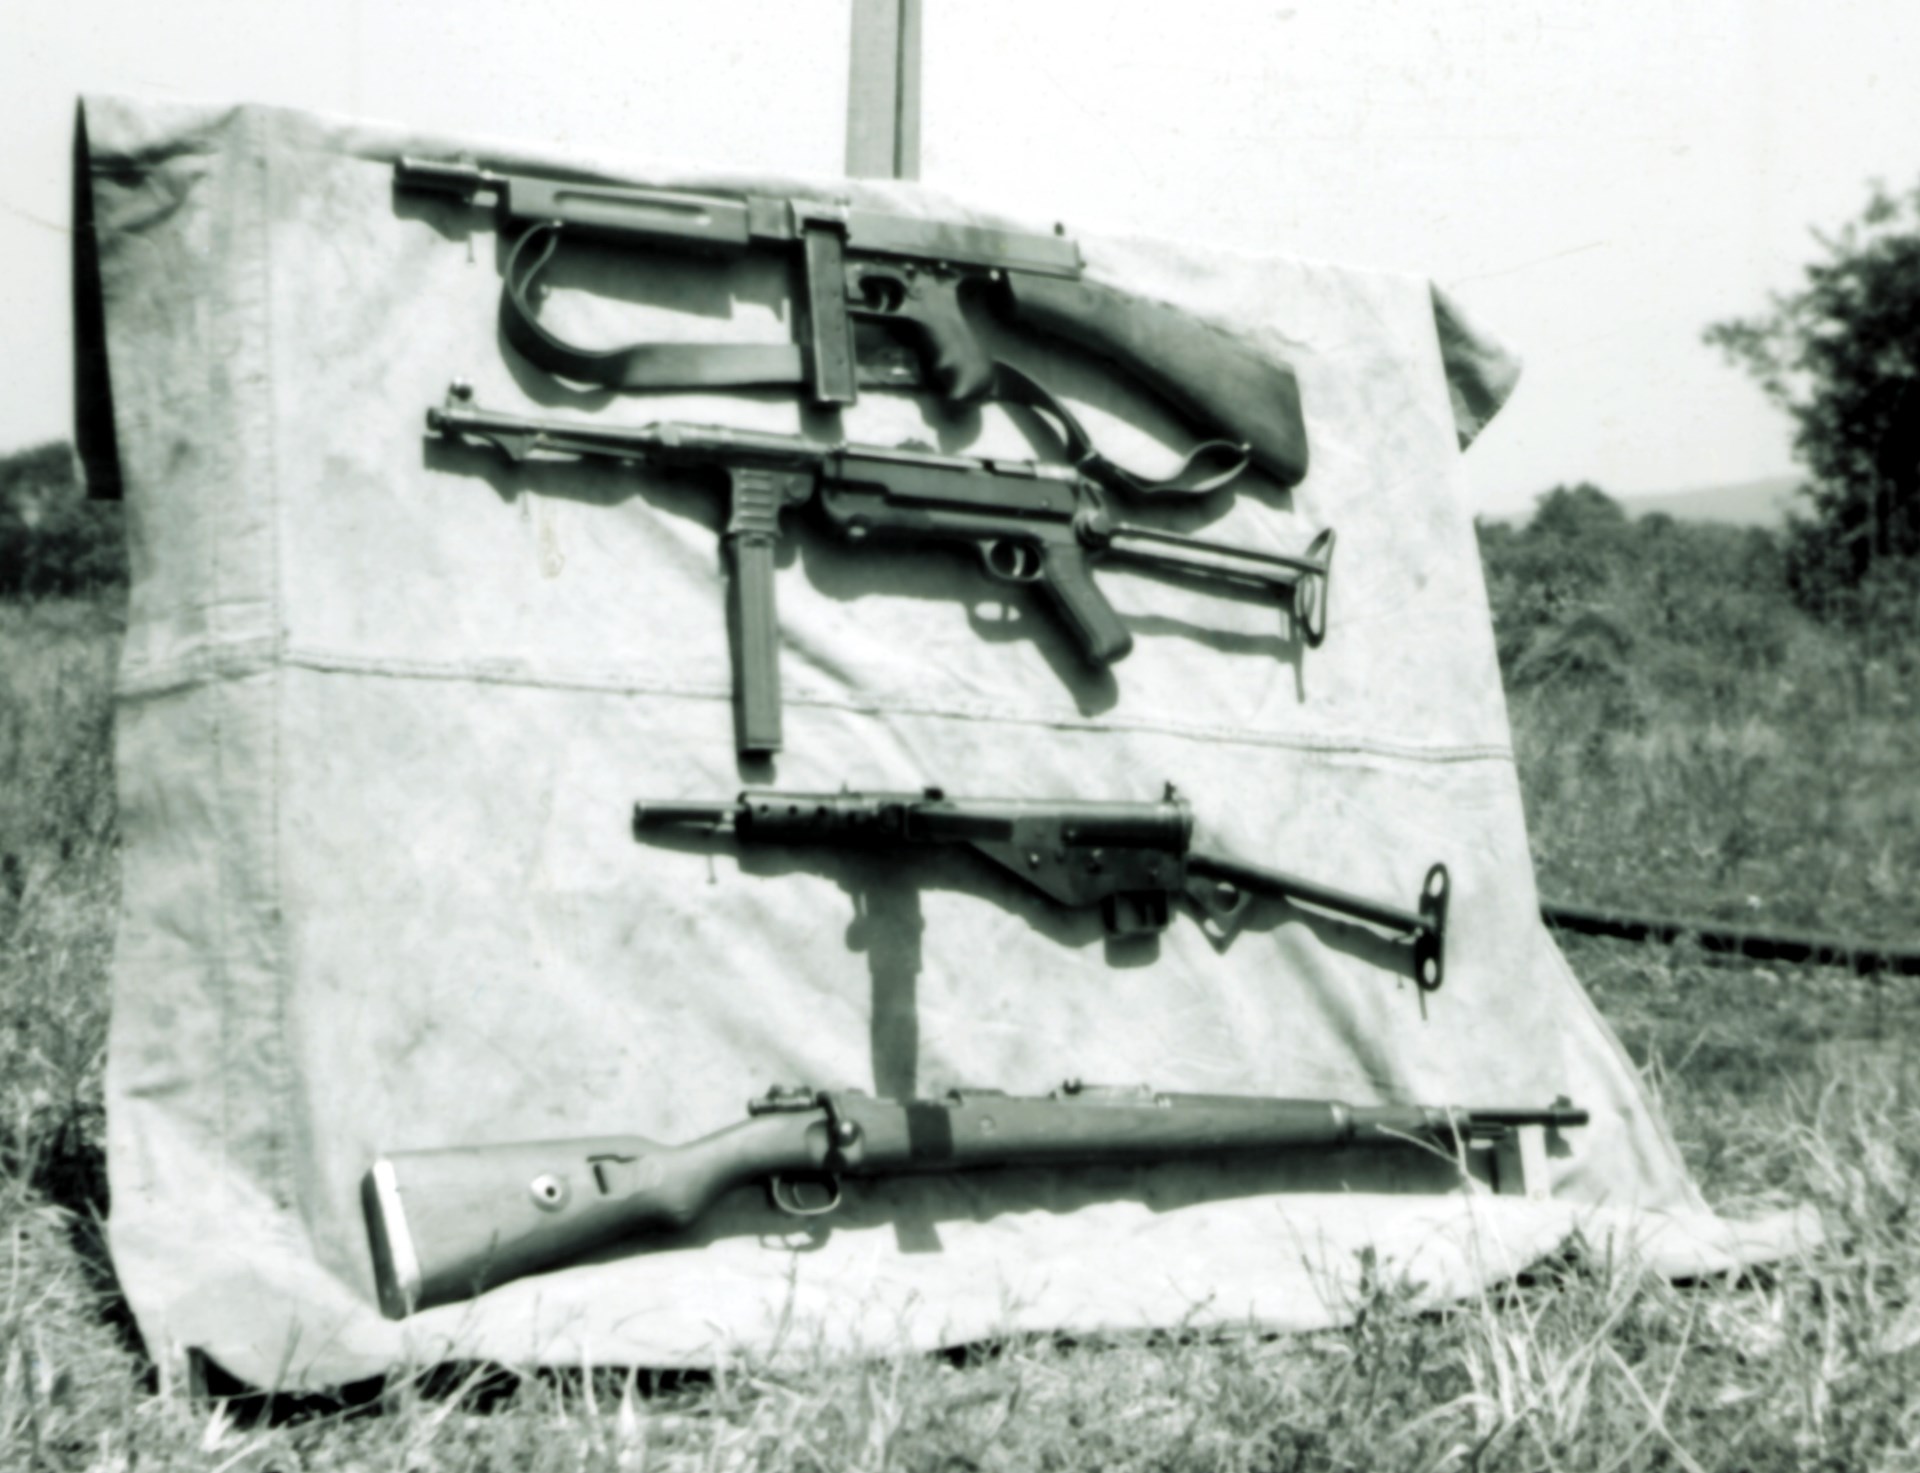 The Thompson SMG provided the short-range firepower for the 1SSF, shown in a Forcemen’s display along with a German MP40, an early Sten Mk II, and a Mauser Karabiner 98k rifle. Author’s collection